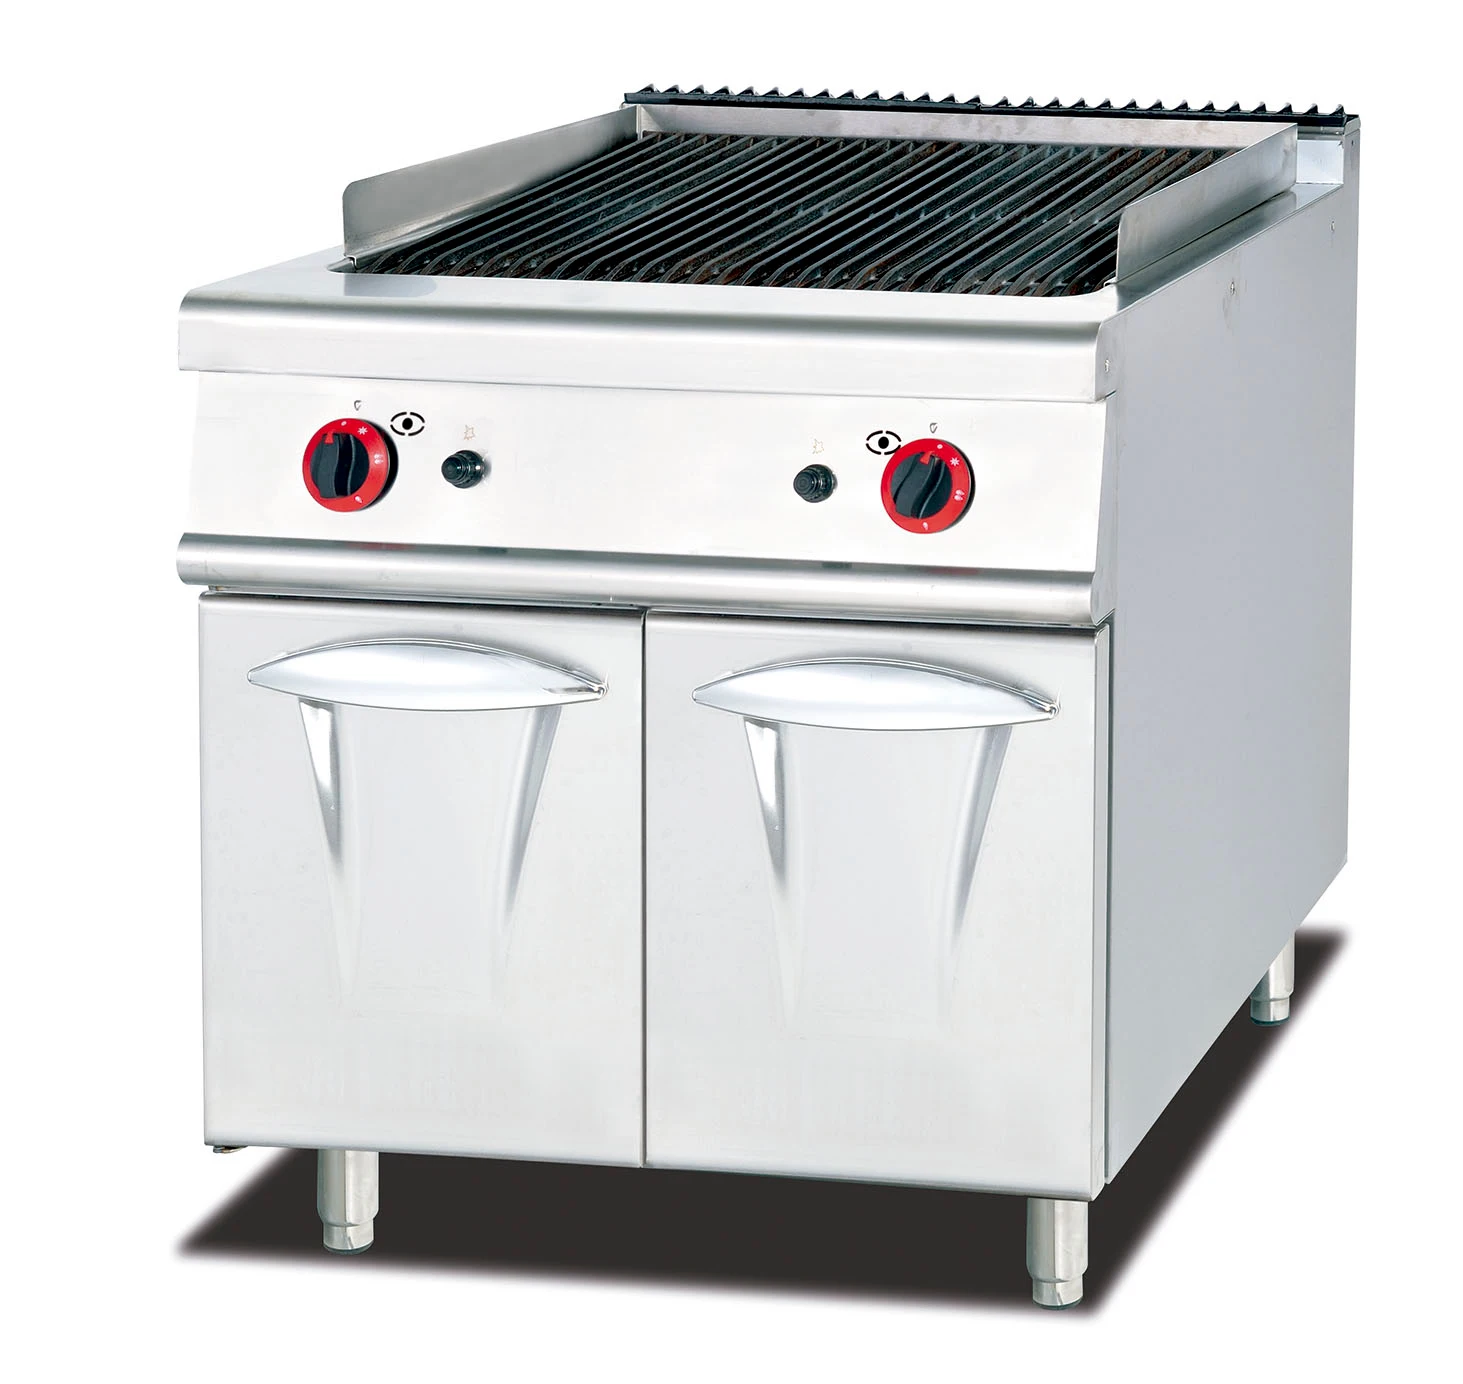 RM Commercial bbq restaurant kitchen stainless steel cooking gas electric burger griddle & stand grill pan flat plate heavy duty